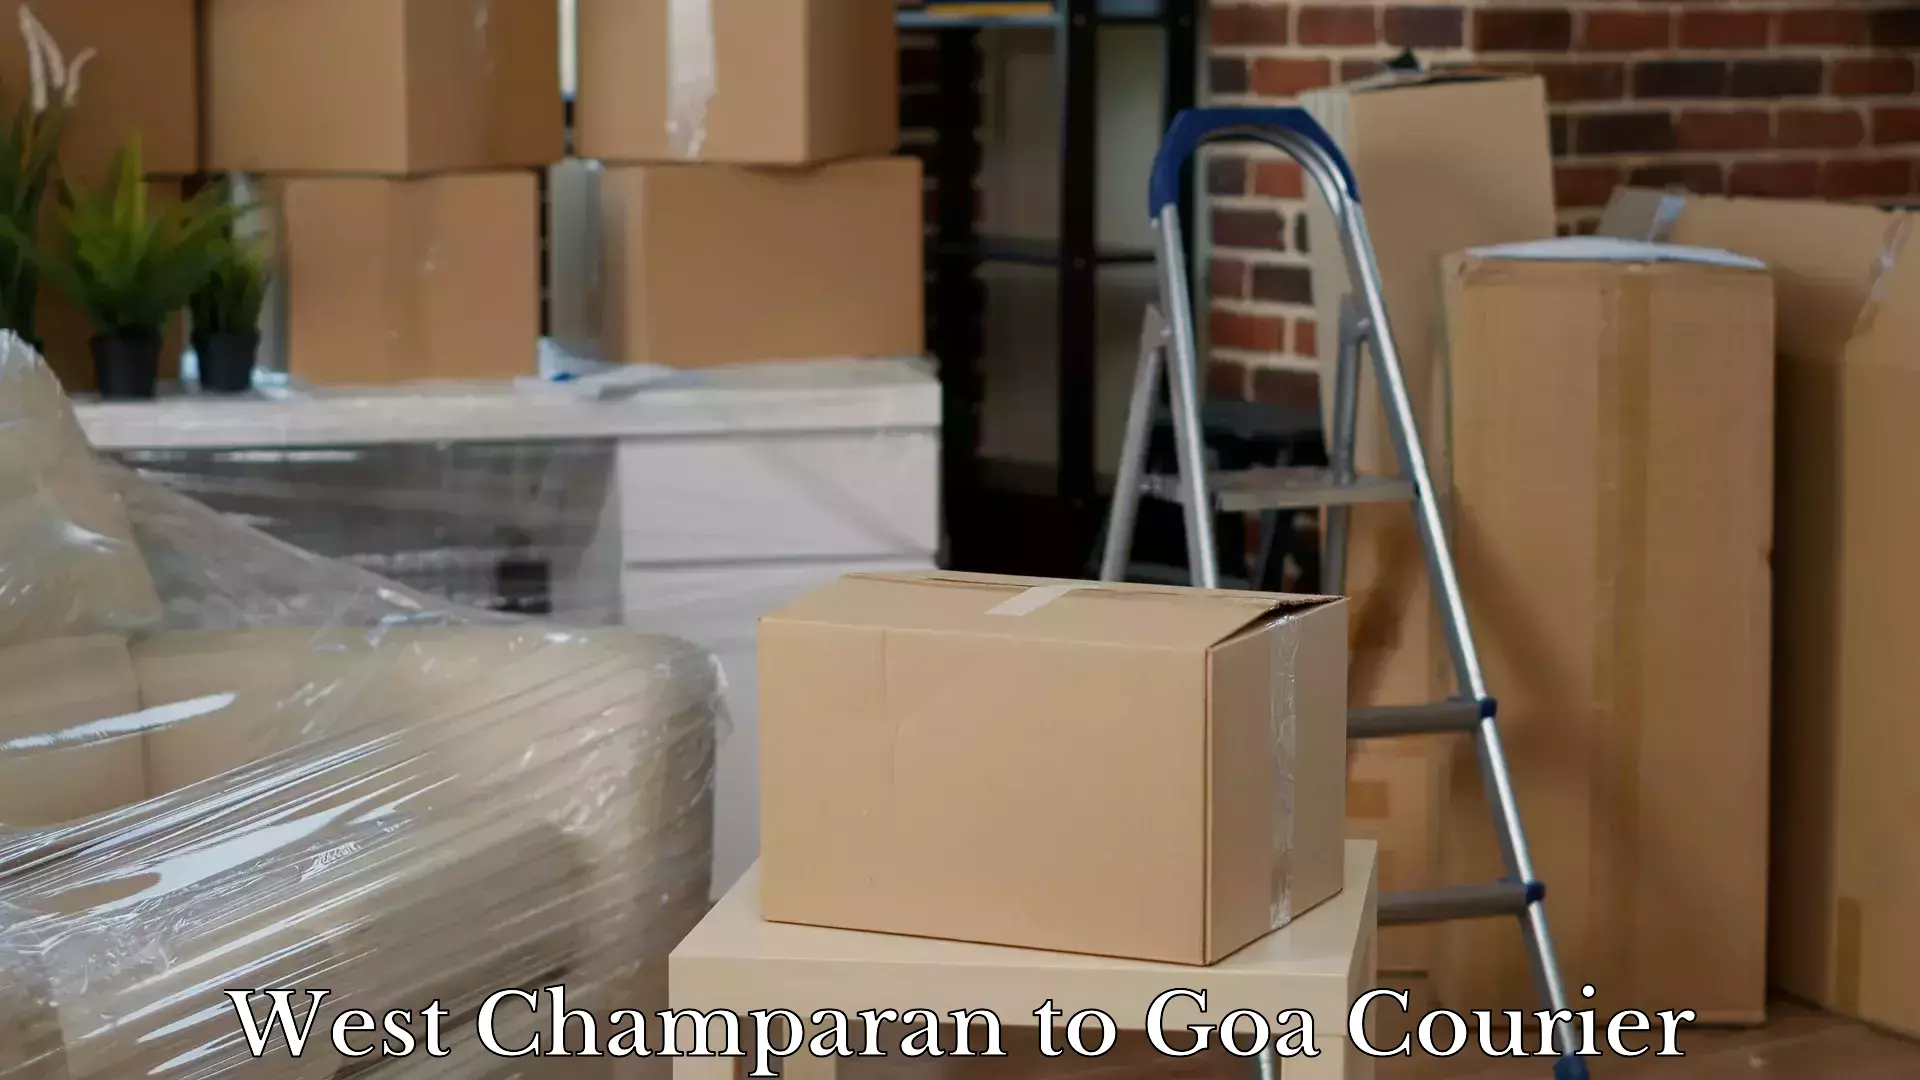 Luggage transport company West Champaran to Goa